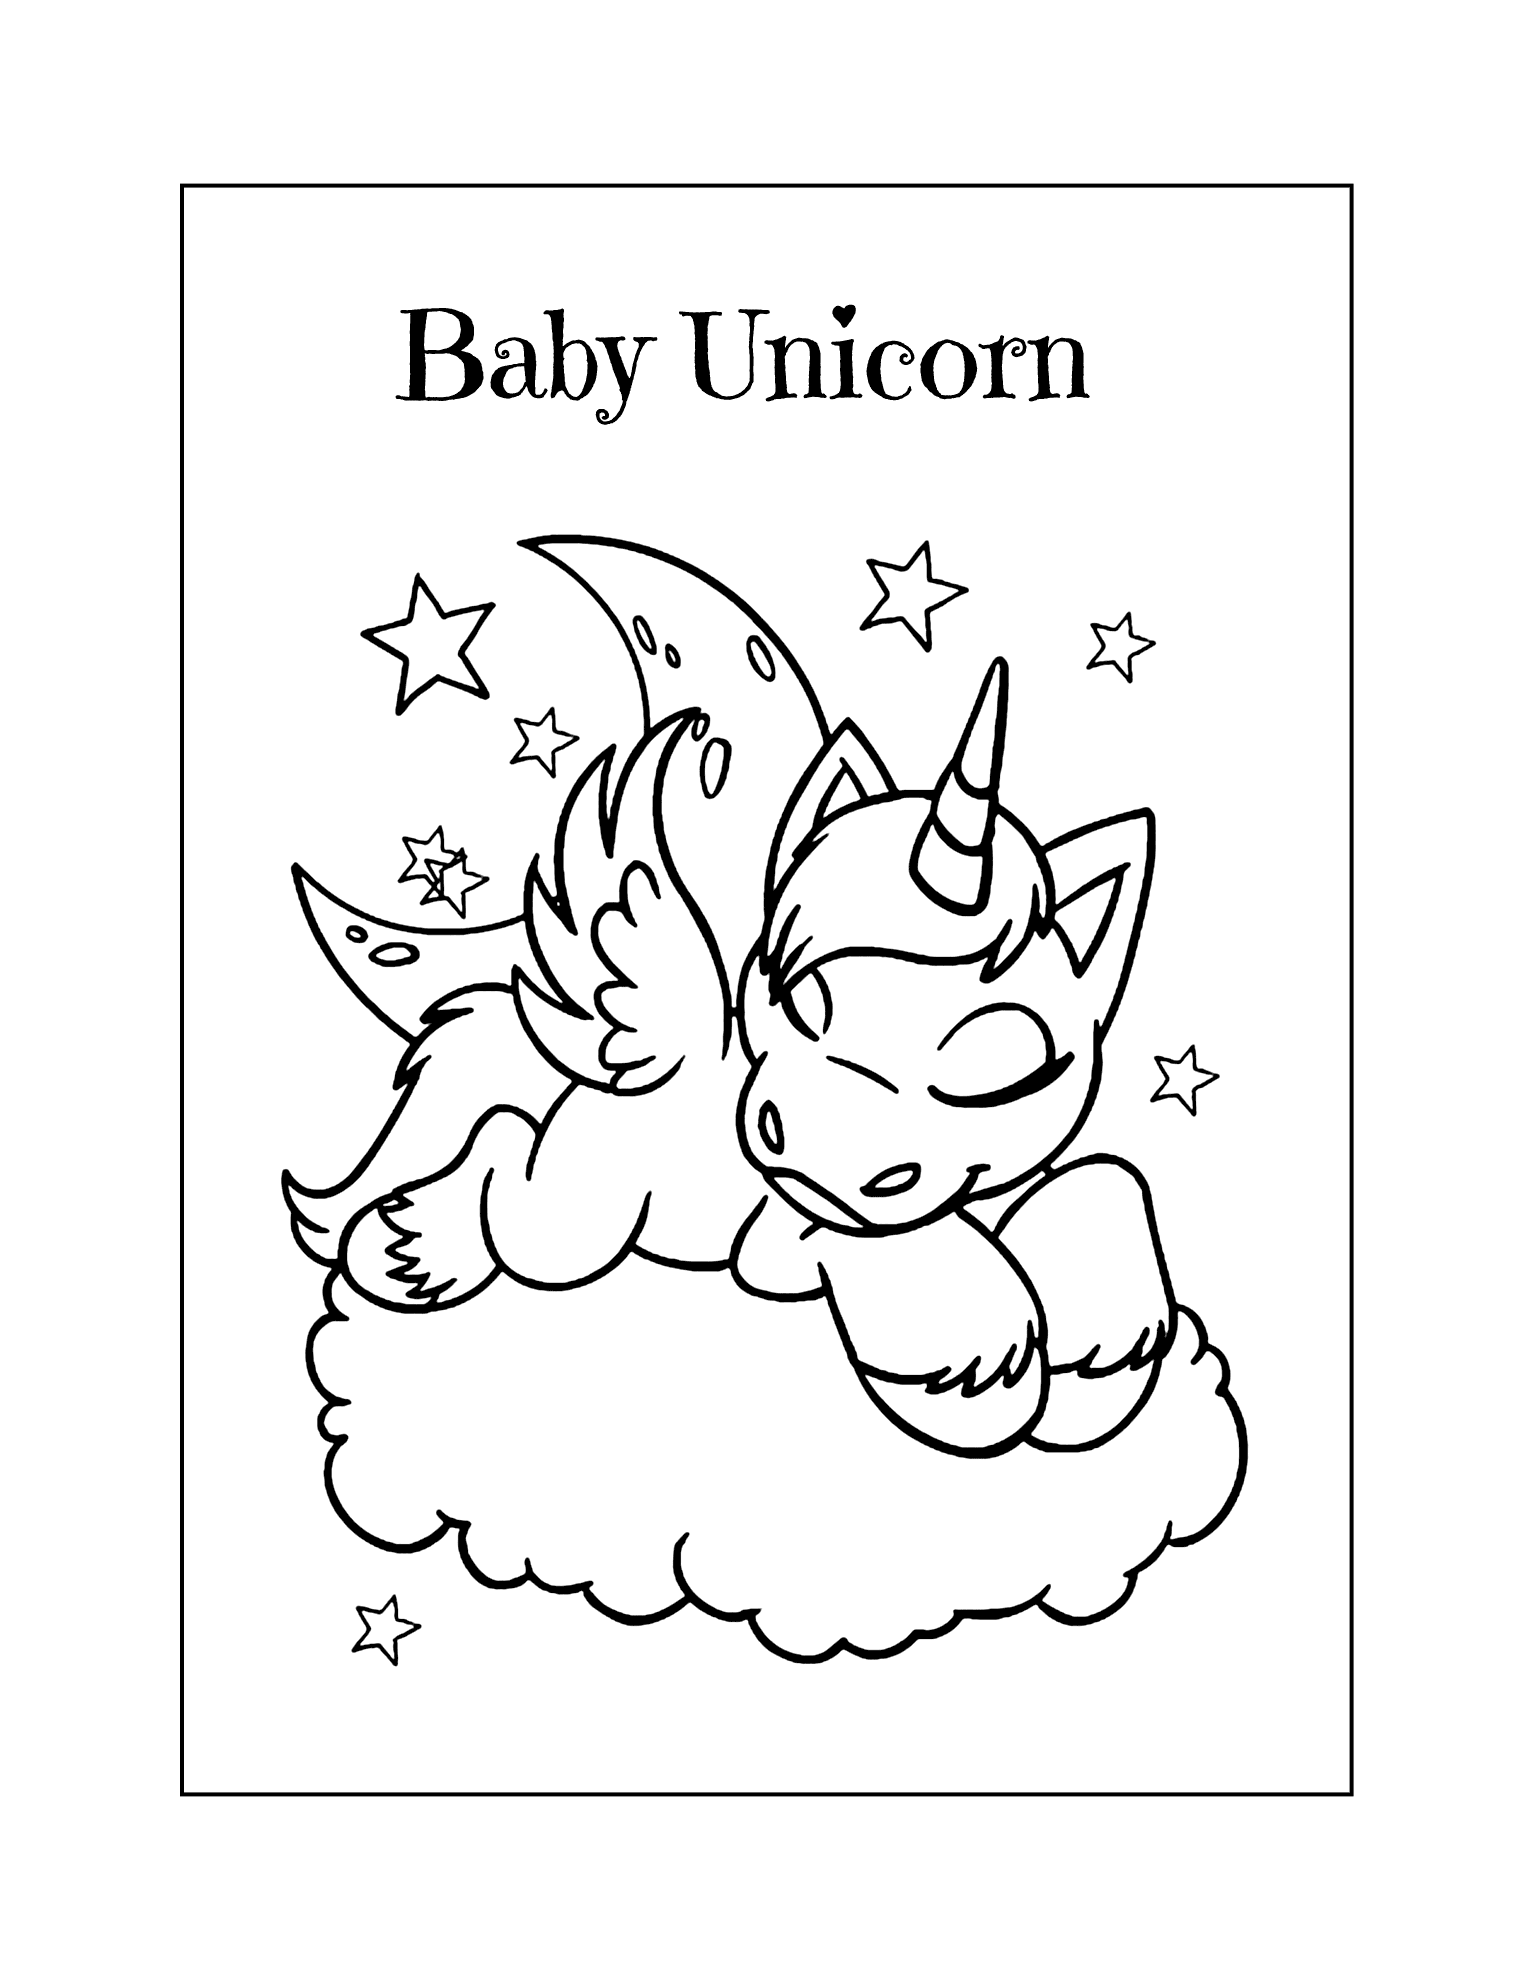 Baby Unicorn Sleeping On A Cloud Coloring Page